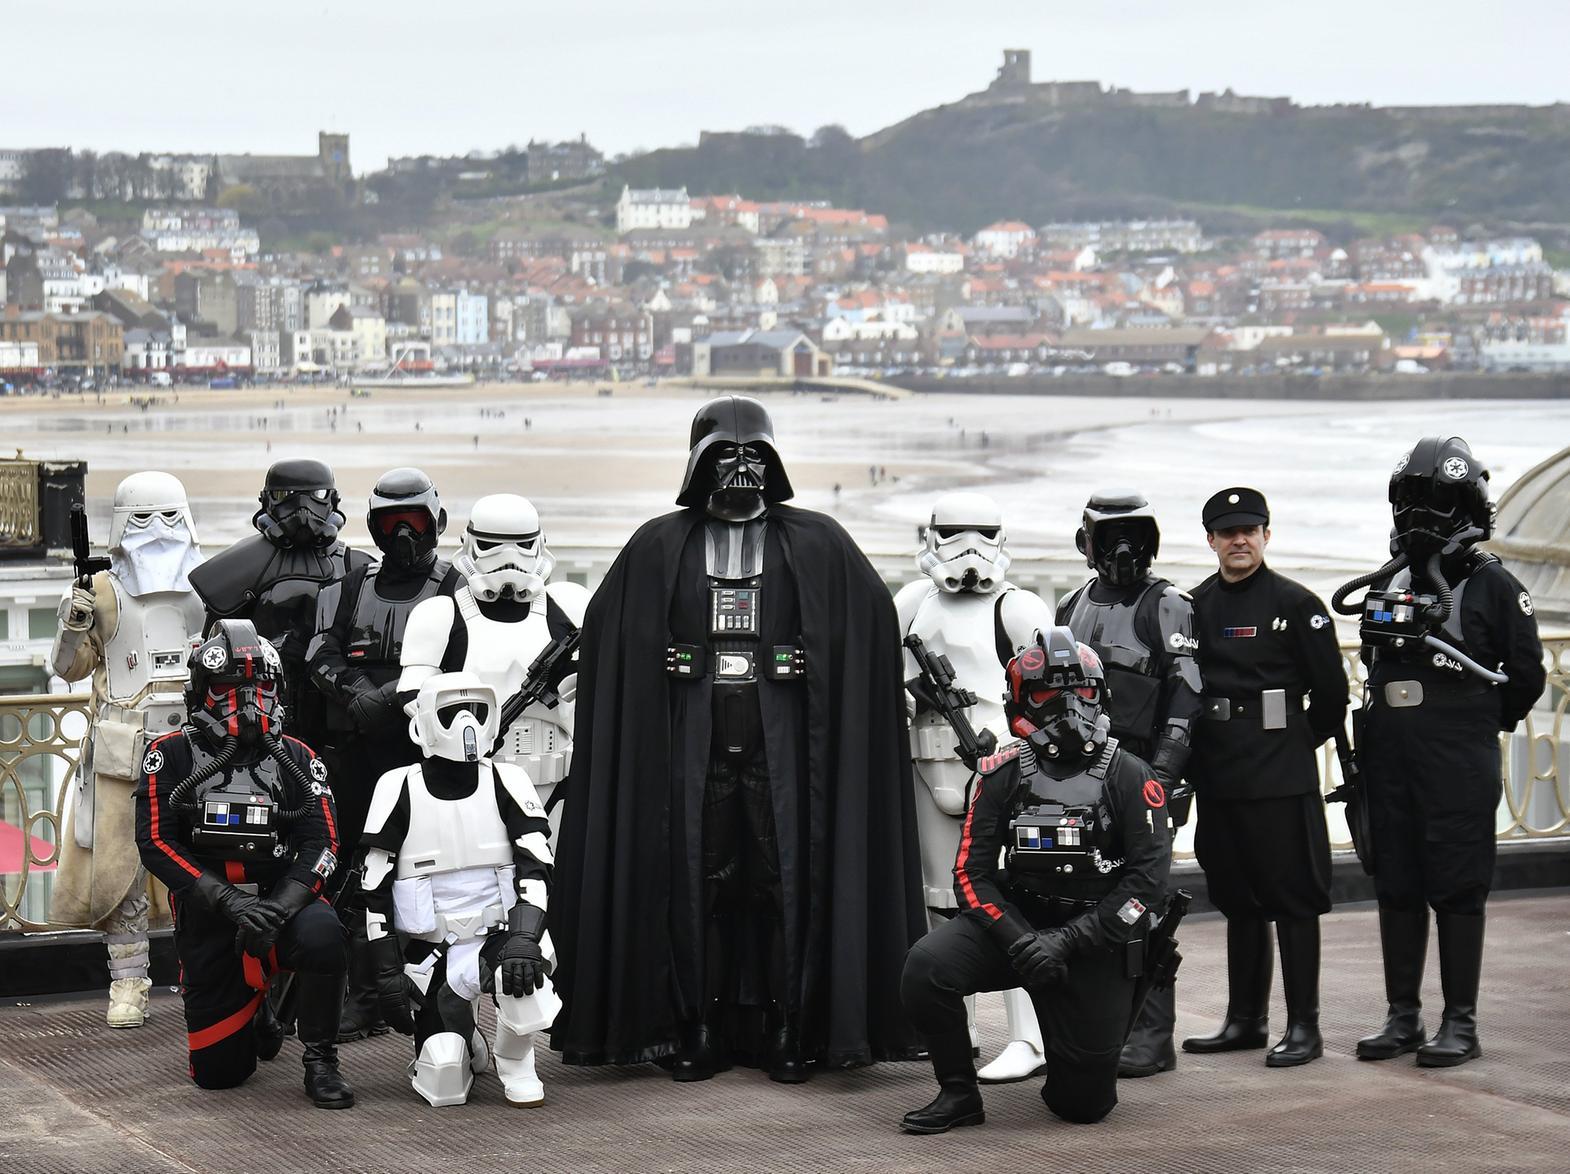 Sci Fi Scarborough returned for 2019 with appearances from famous famous such as Harry Potter actor Chris Rankin and Game of Thrones star Ross O'Hennessy.